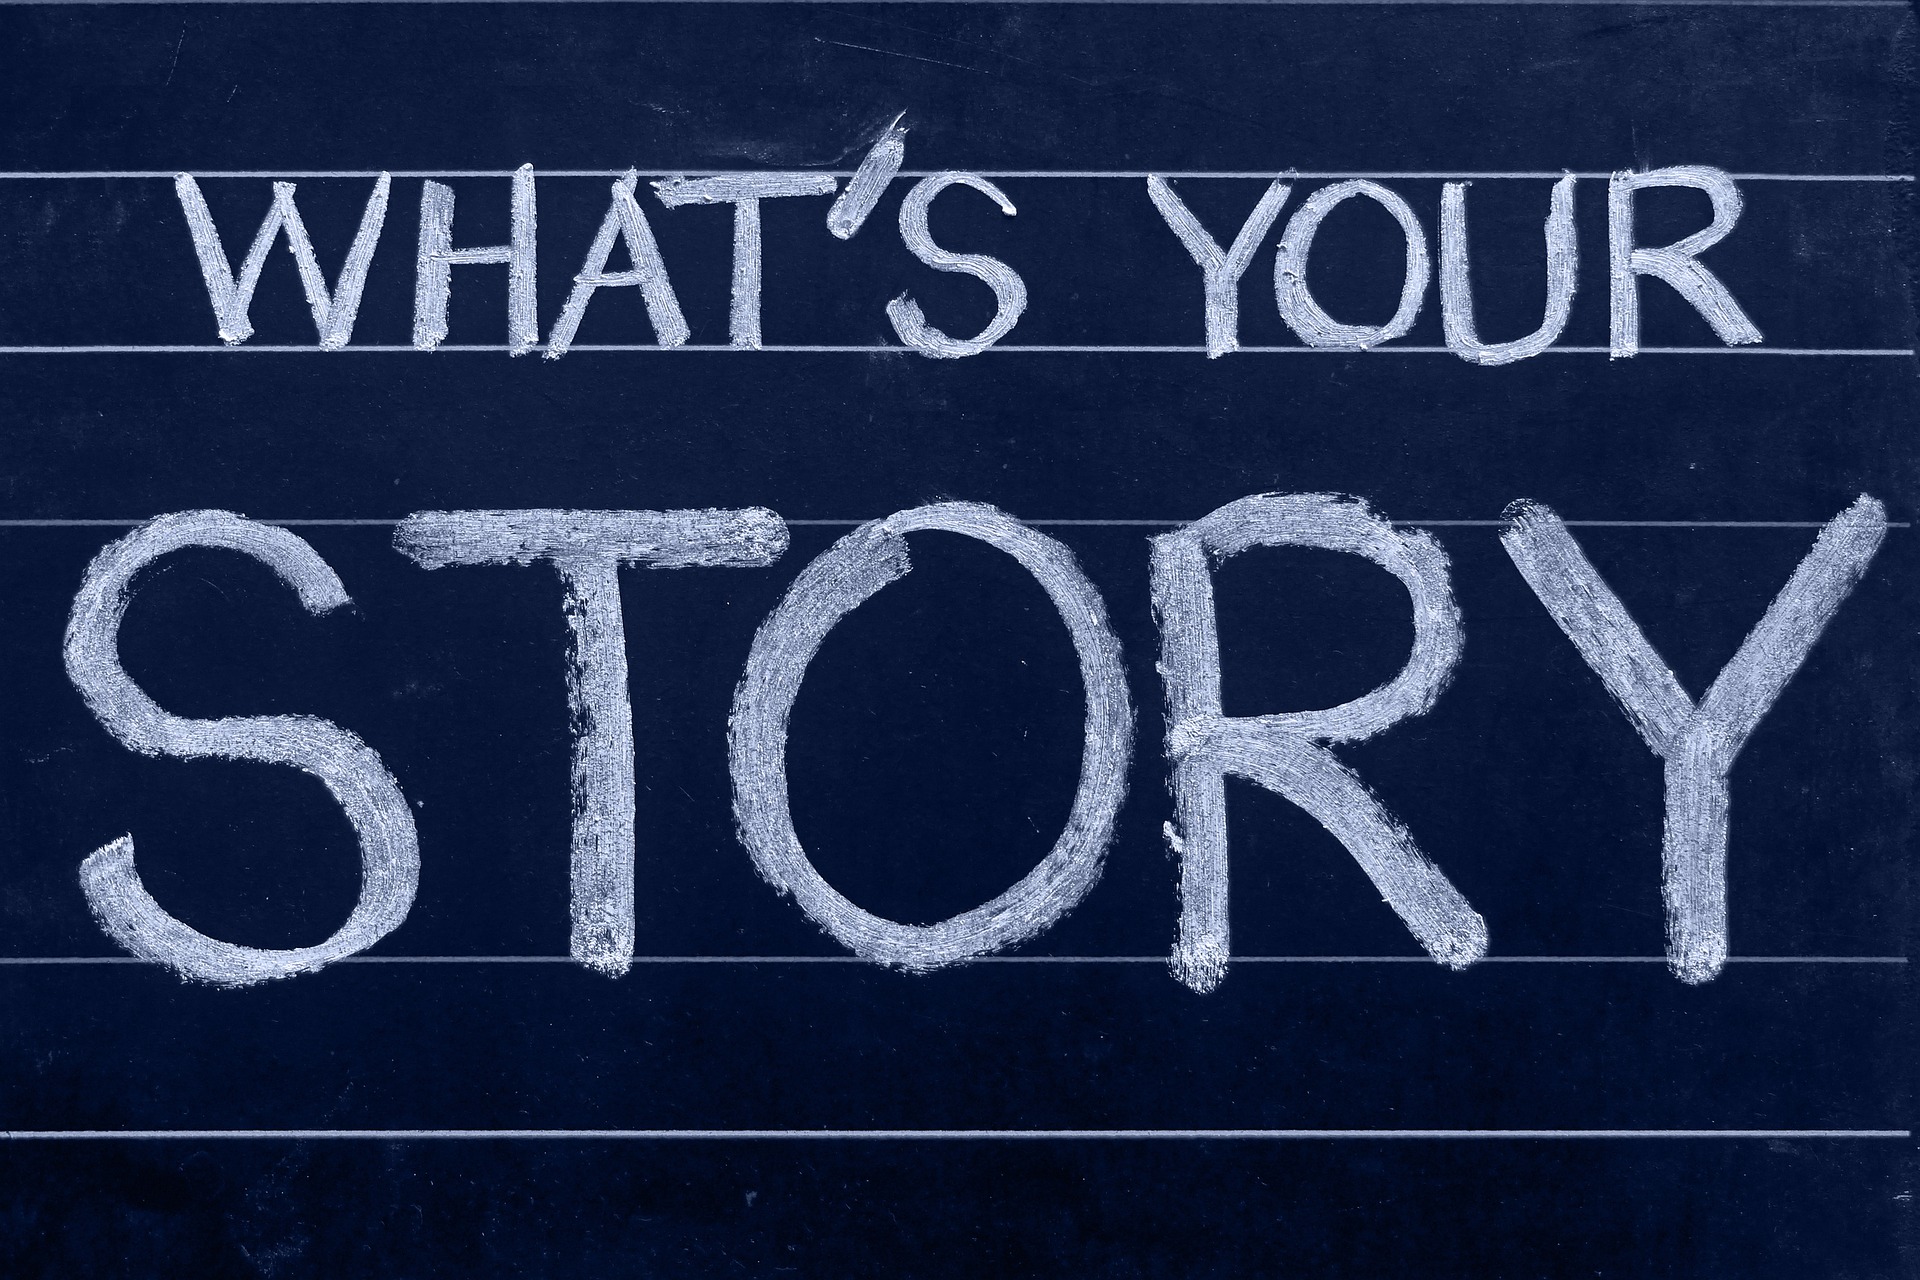 A blackboard with the words "What's your story?" written in white chalk on it.